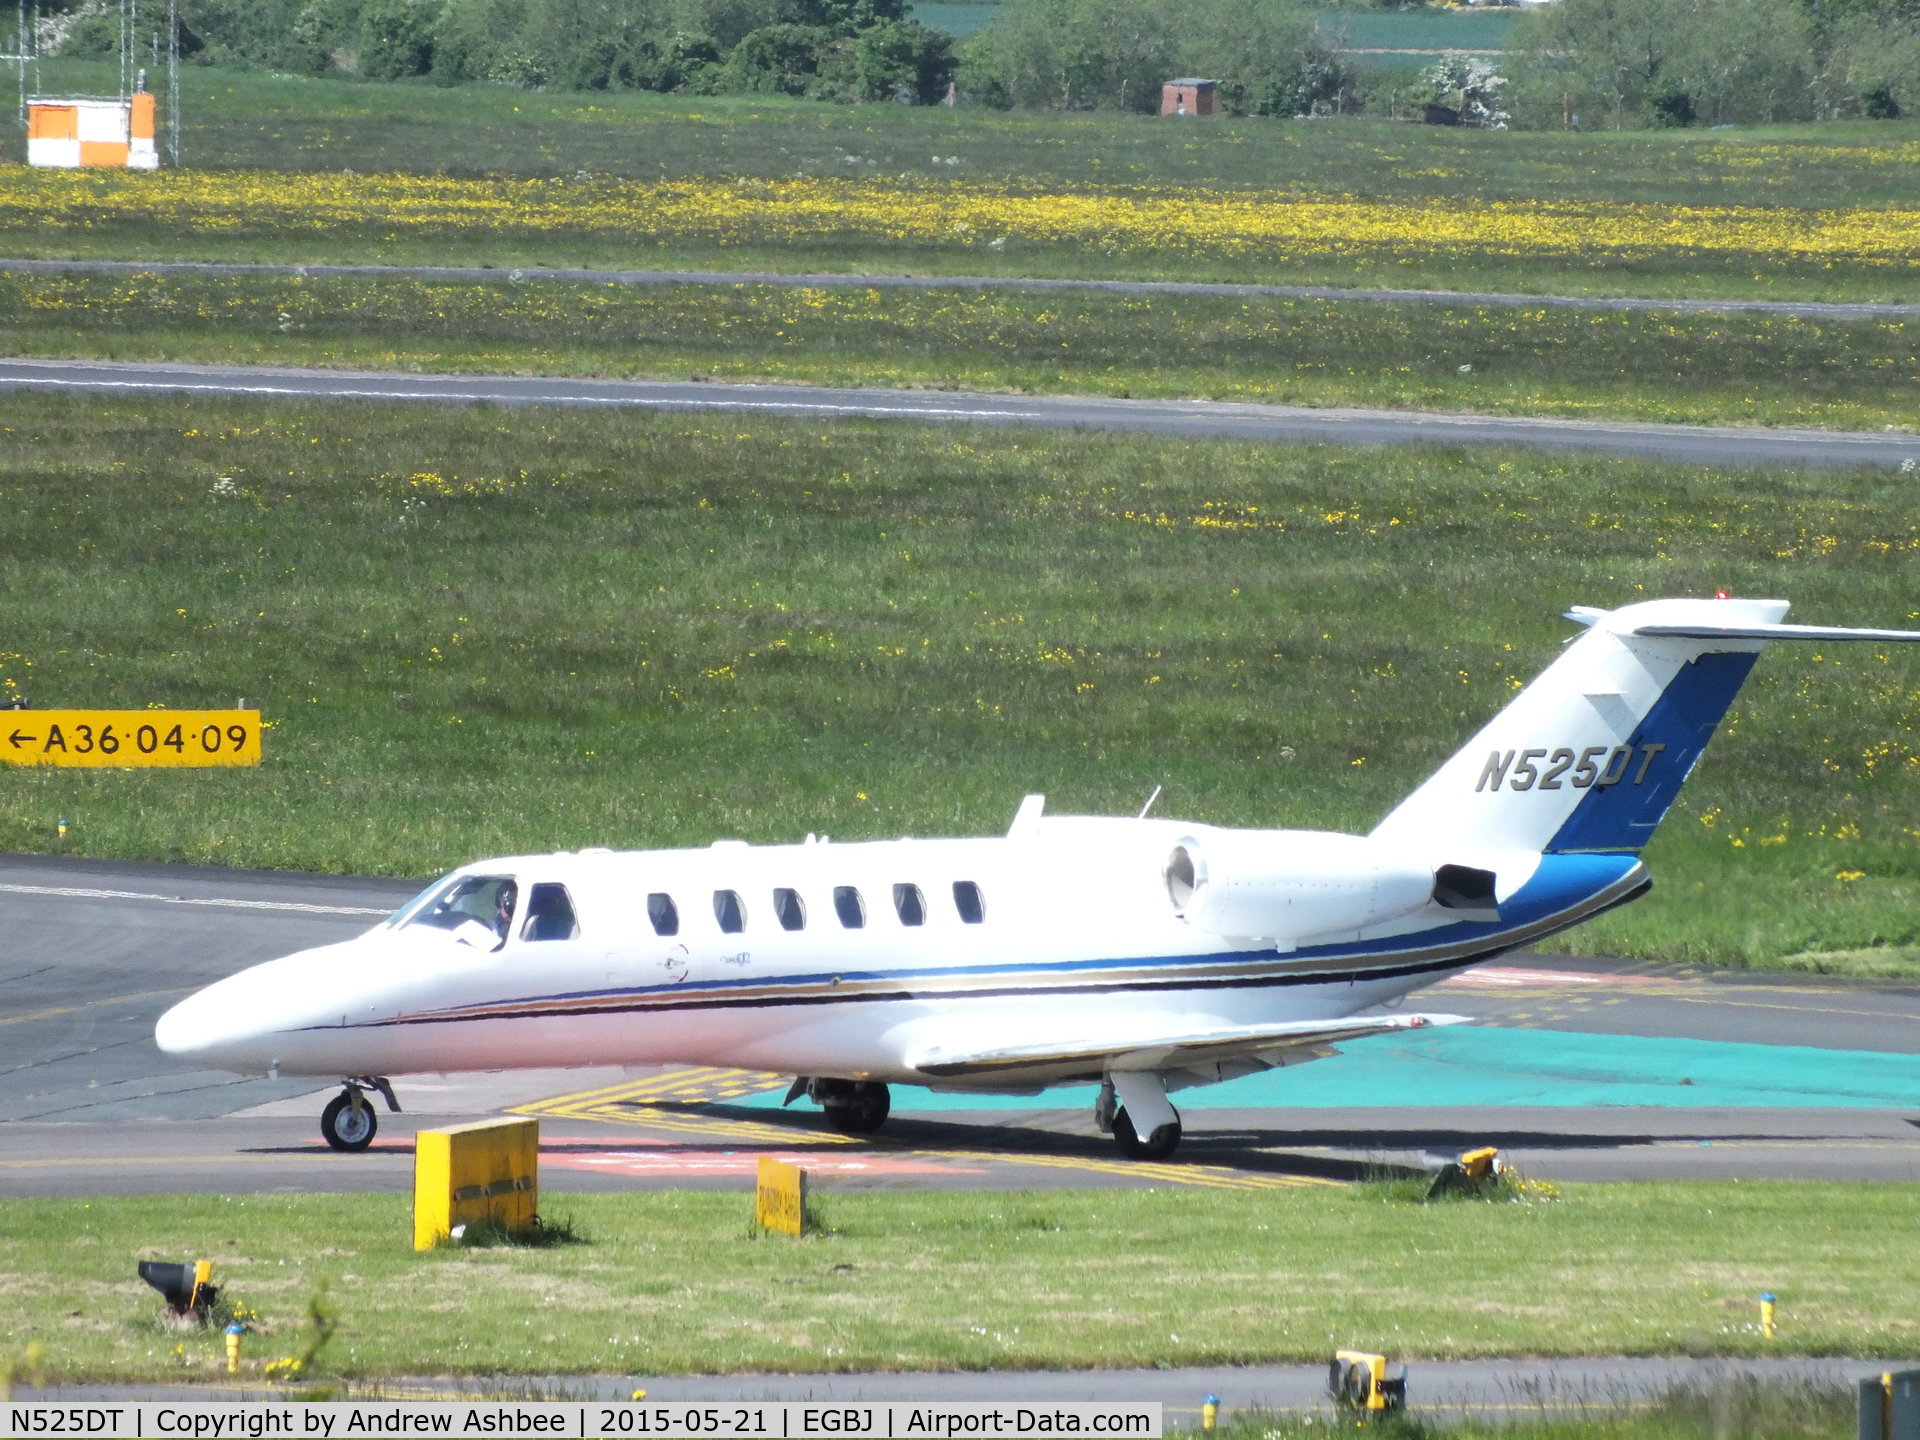 N525DT, 2000 Cessna 525A CitationJet CJ2 C/N 525A0003, at Gloucestershire Airport.